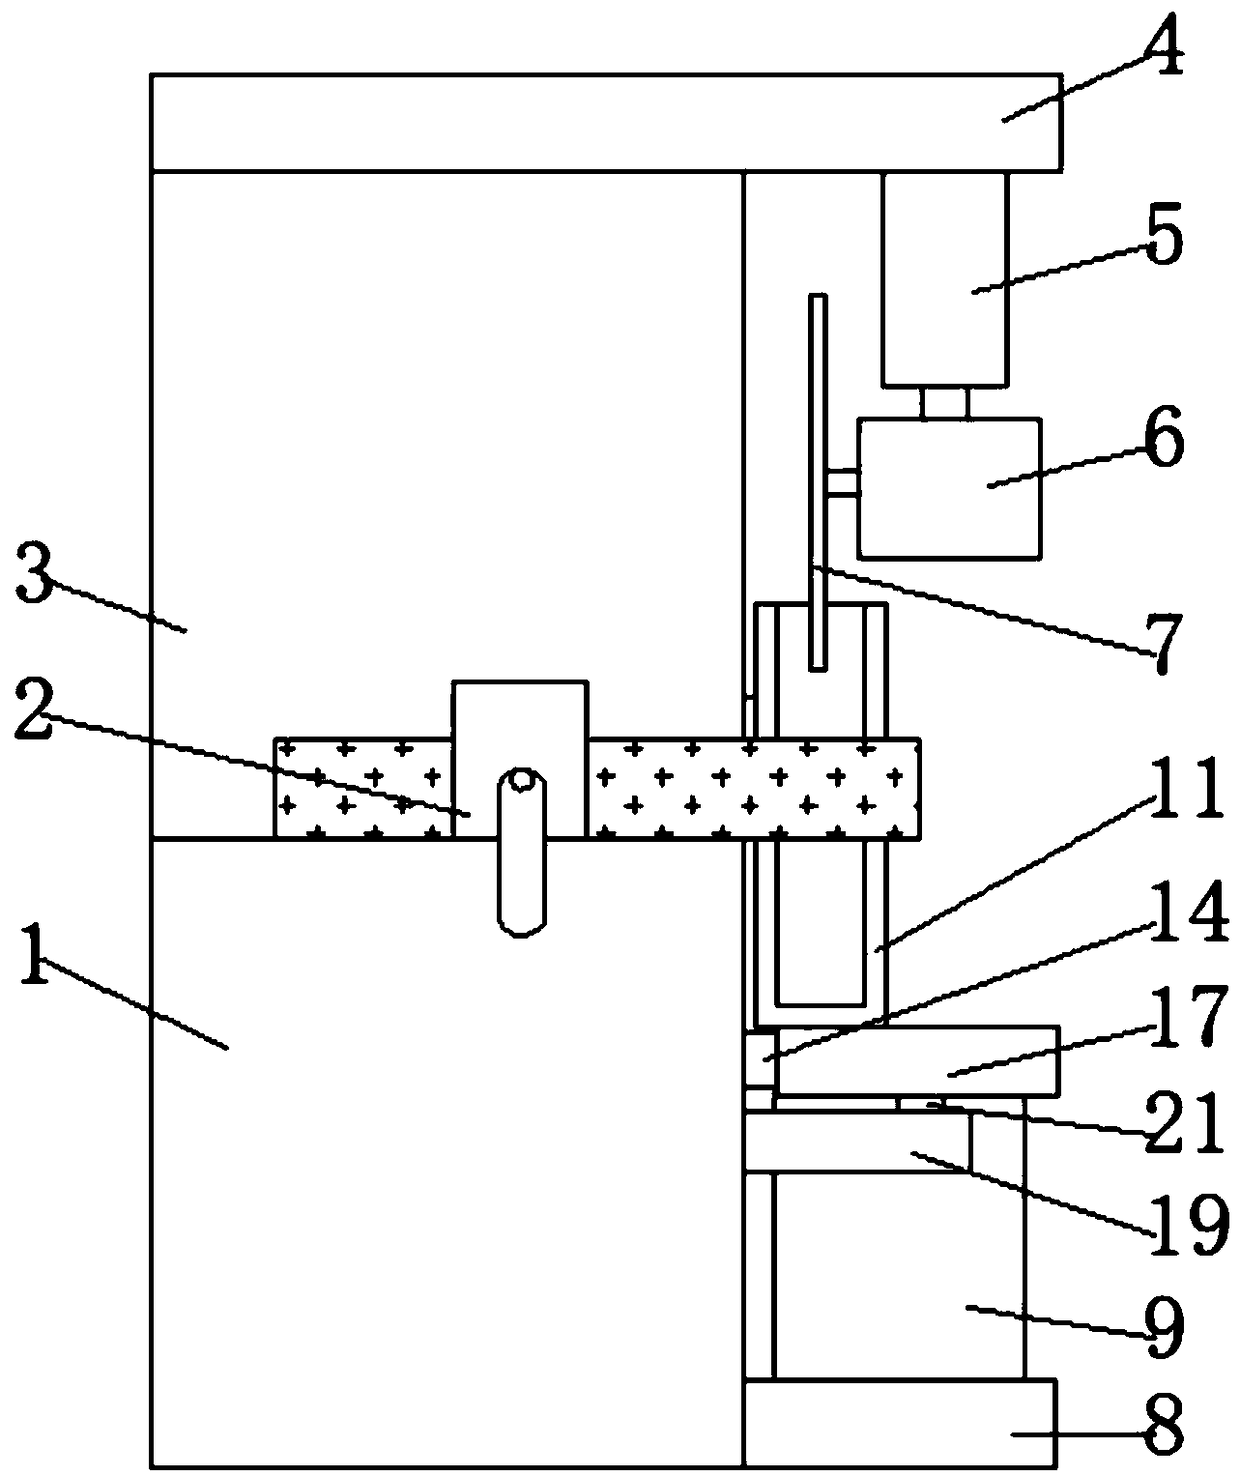 Environment-friendly cutting device for machining mechanical parts